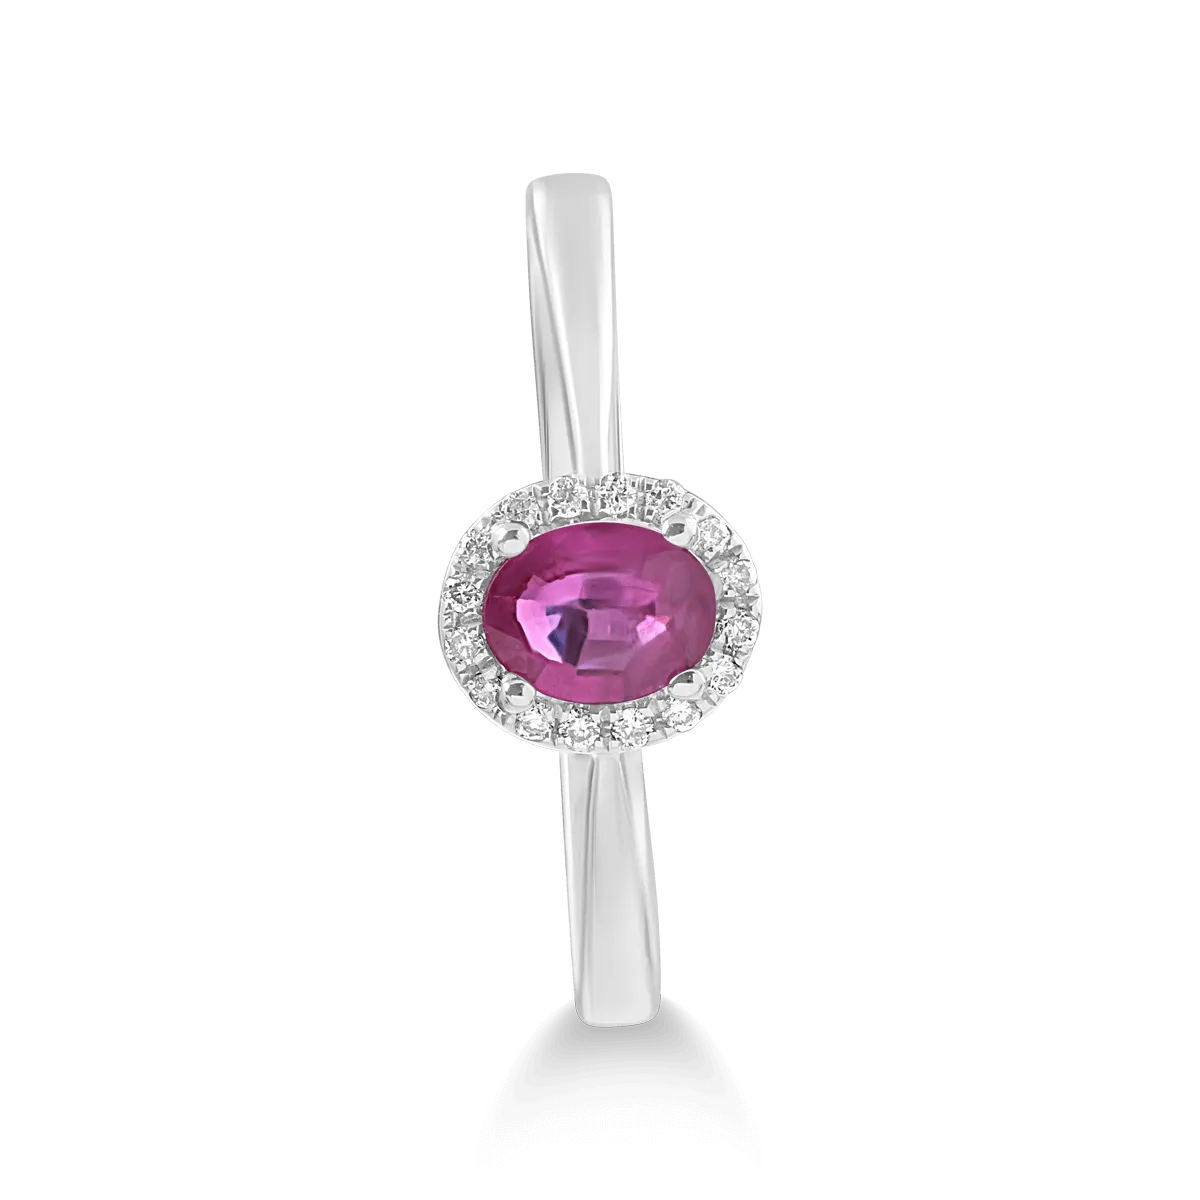 18K white gold ring with 0.5ct ruby and 0.05ct diamonds